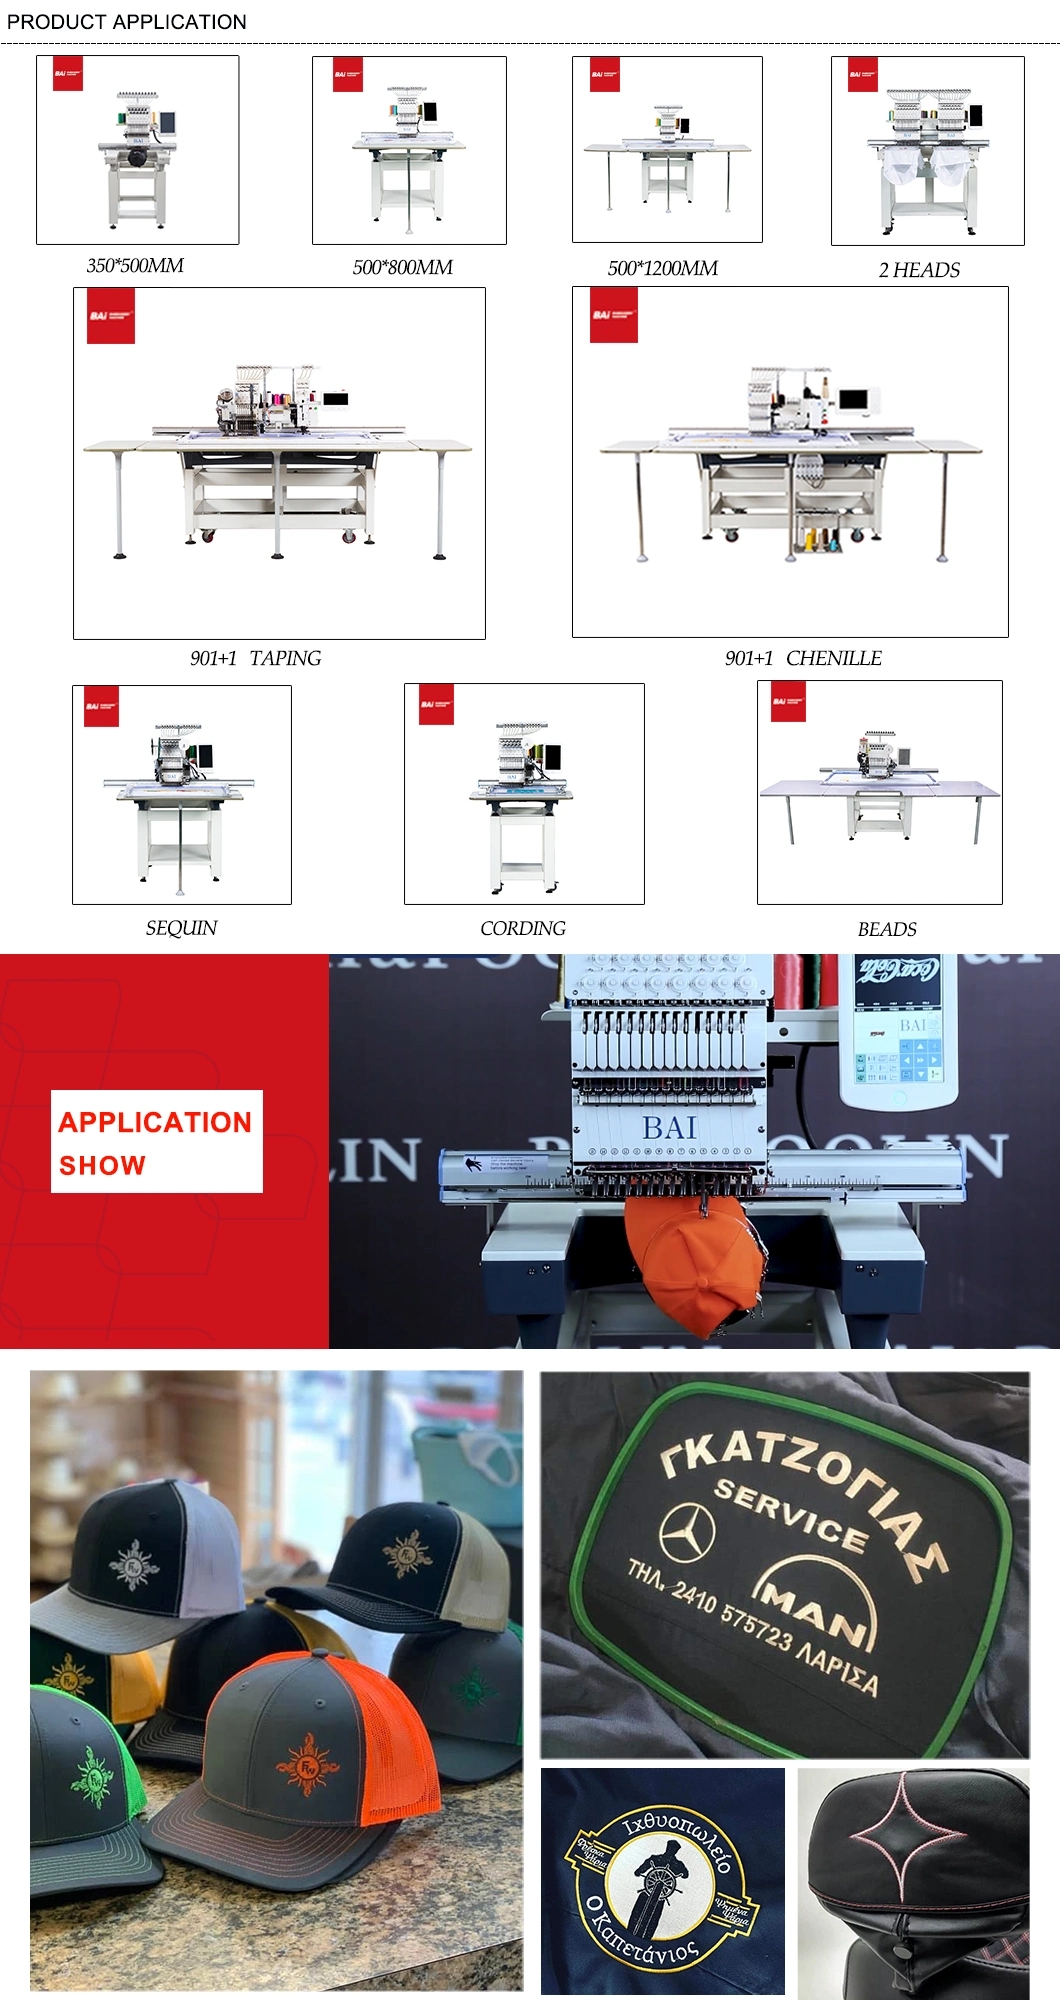 Bai Single Head High Speed Automatic Commercial Multifunctional Computerized Embroidery Machine for Cap T-Shirt Flat